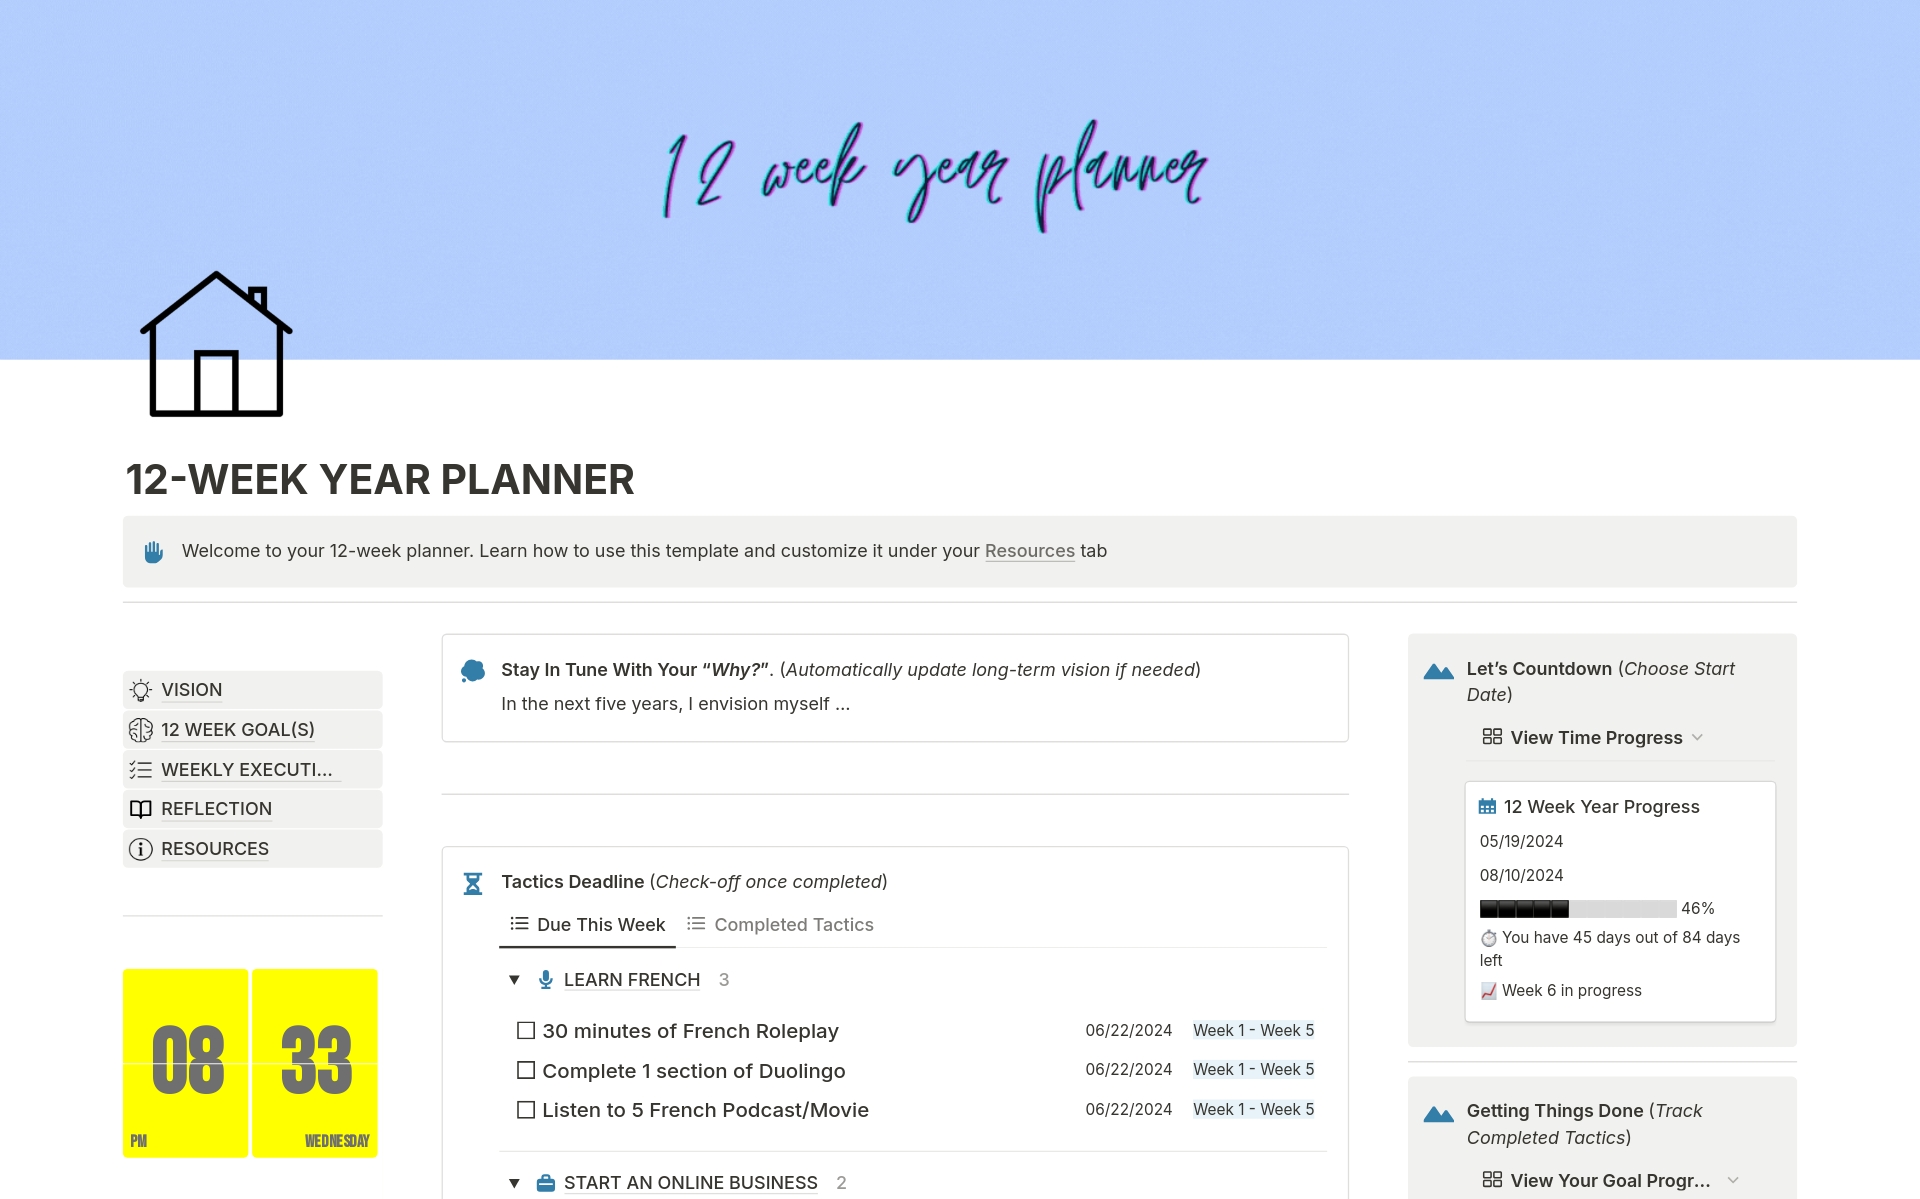 A template preview for 12 Week Year Planner